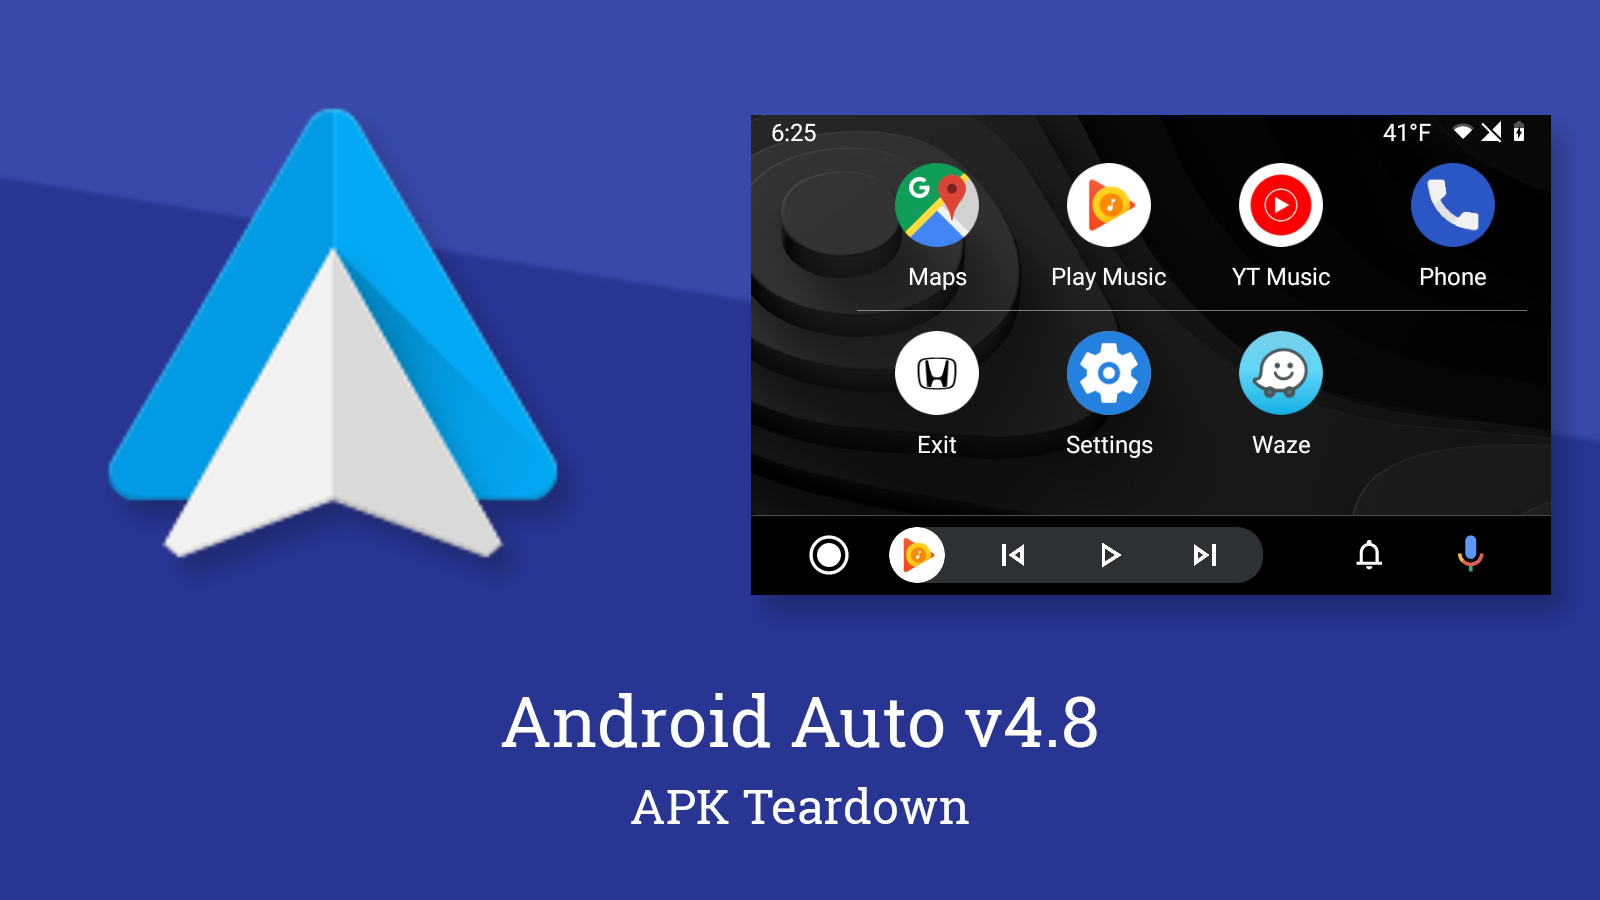 bijwoord Correct benzine Update: Weather rolling out) Android Auto v4.8 is ready to add app drawer  customization and persistent weather [APK Teardown]